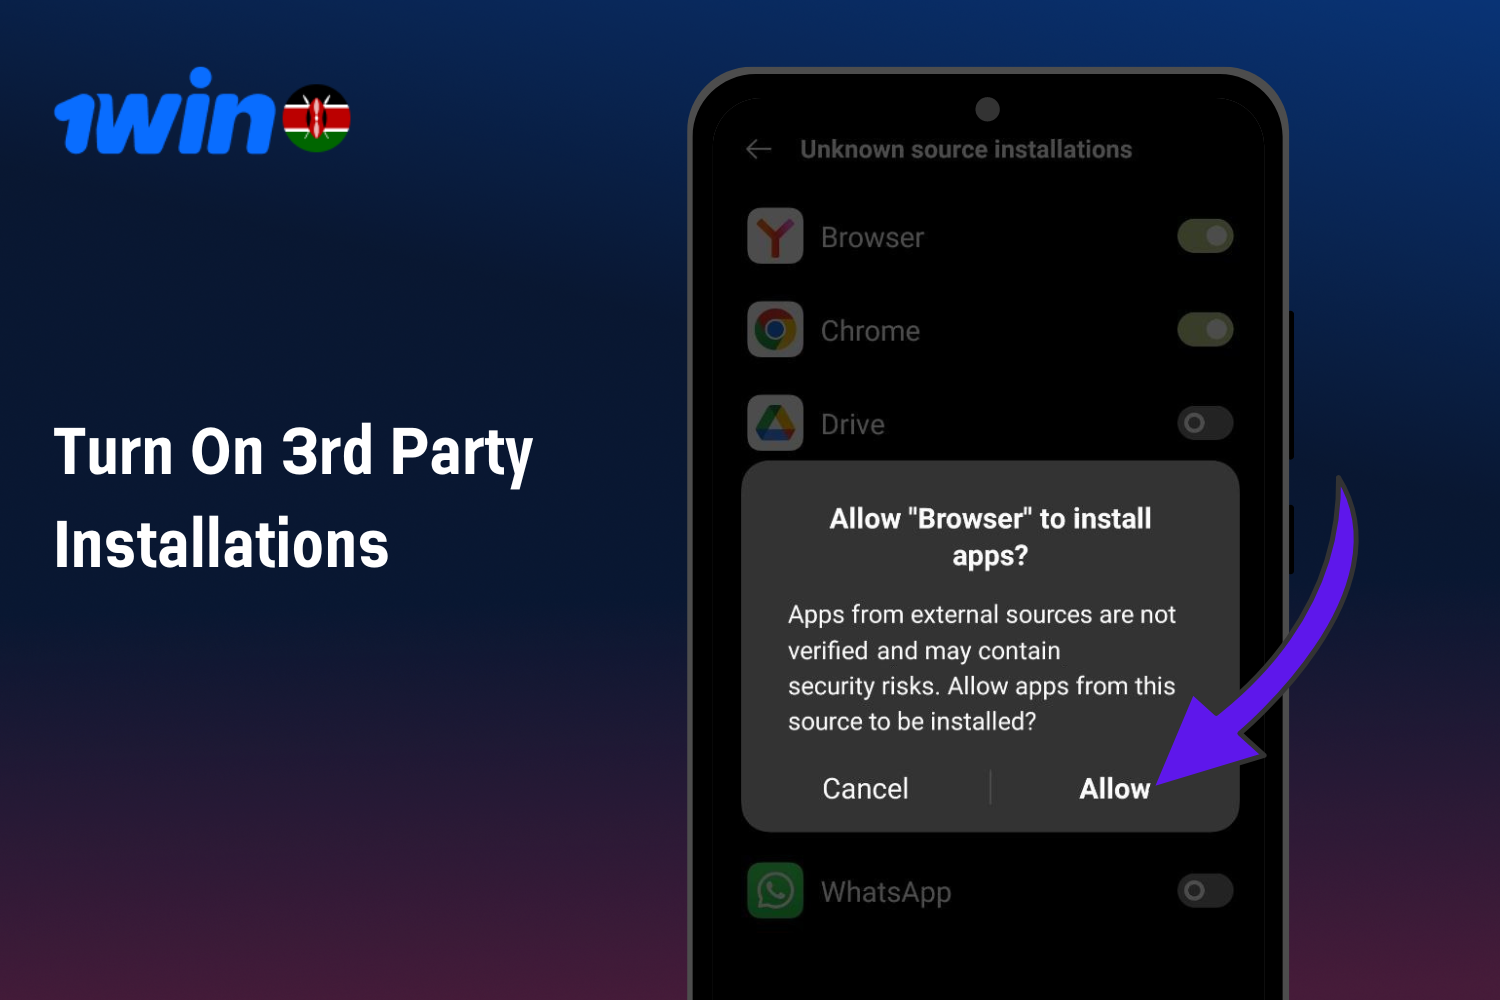 In order to install 1win Apk a user from Kenya needs to enable third-party installations from the phone settings